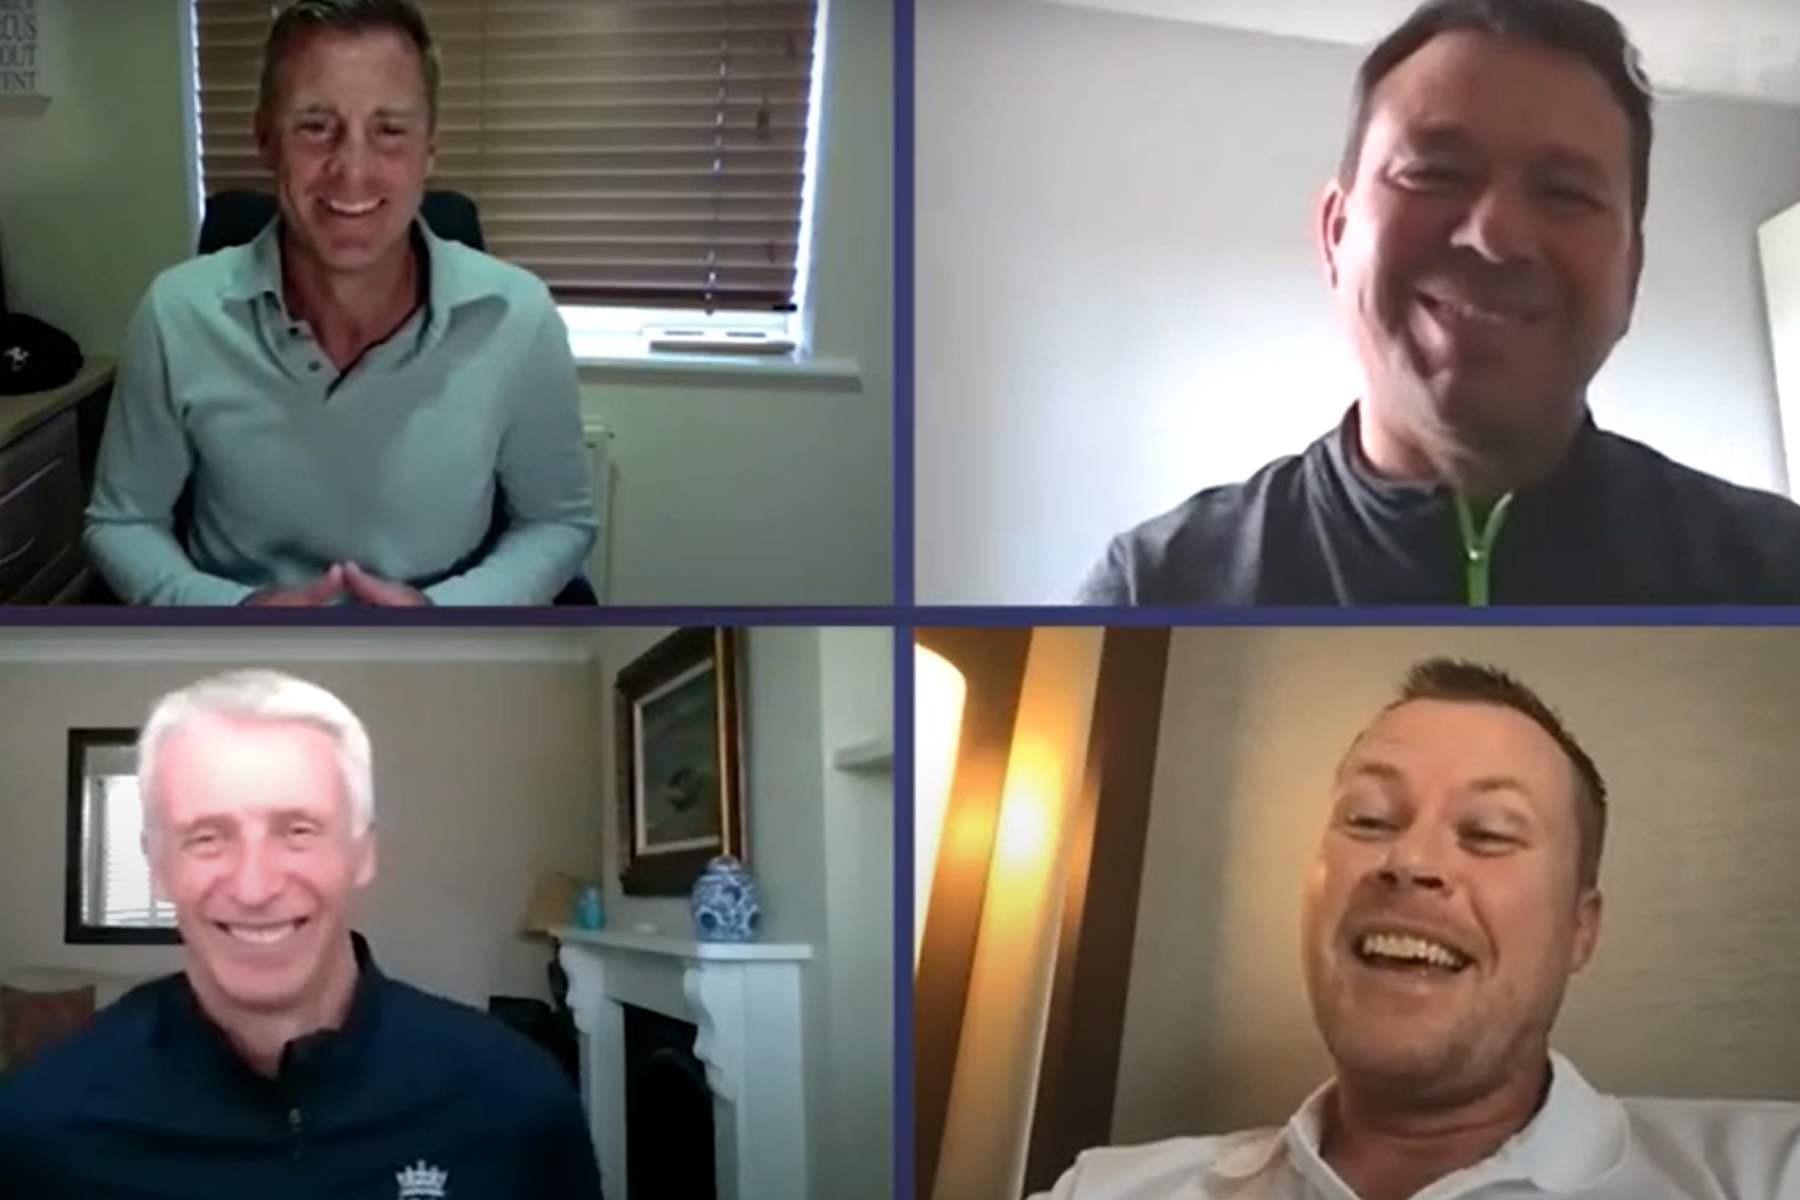 Vodcast – The Business of Cricket